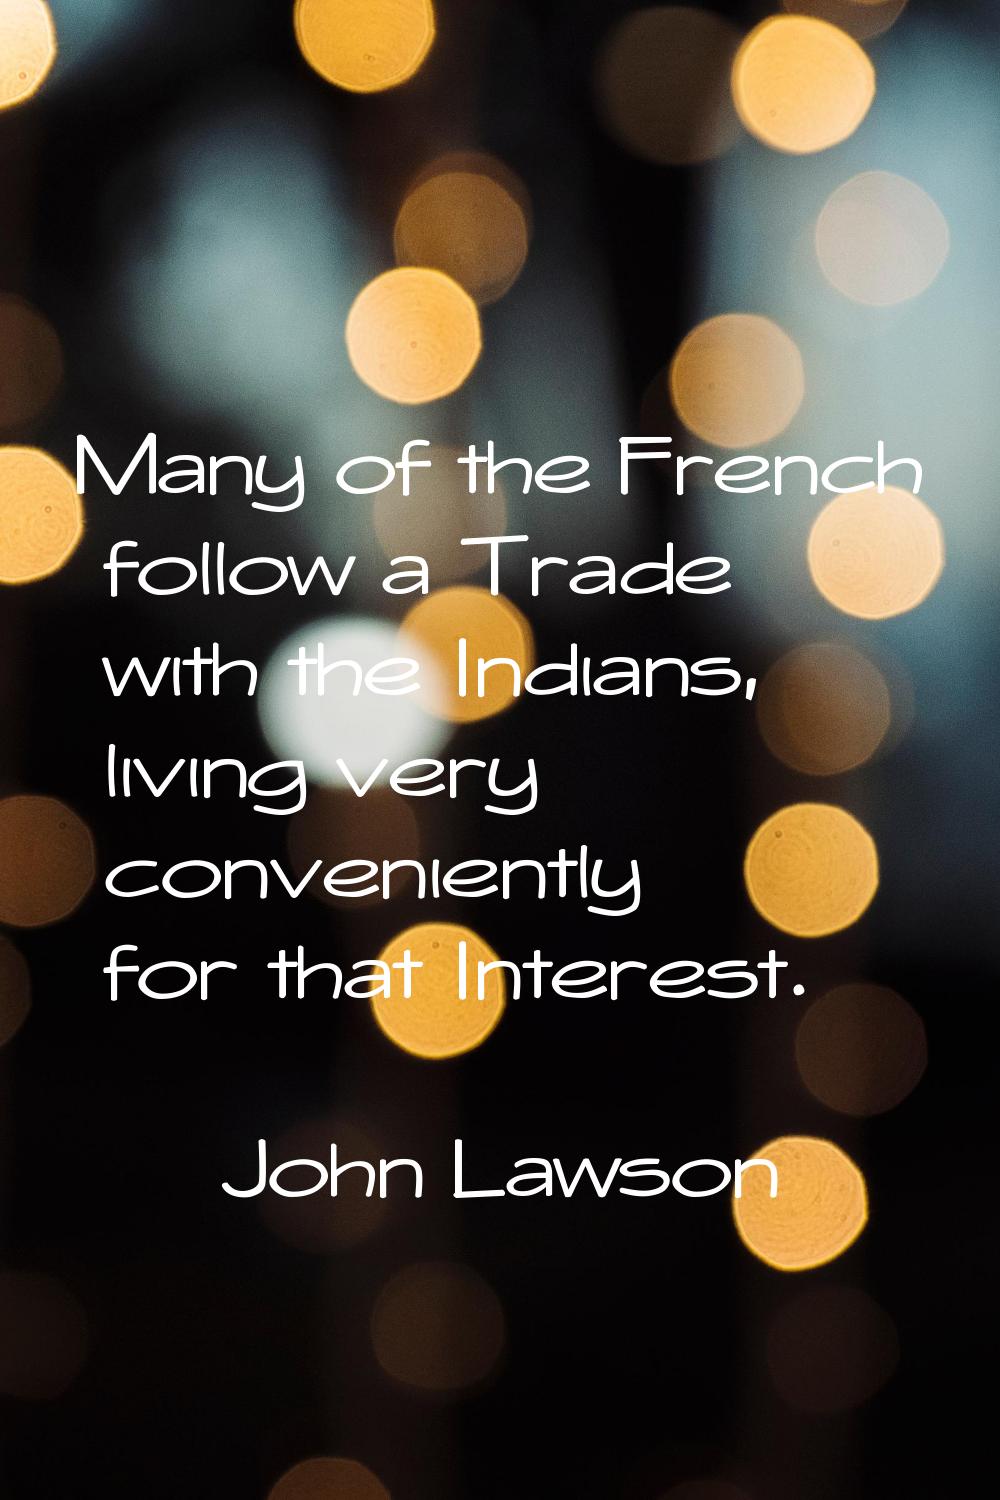 Many of the French follow a Trade with the Indians, living very conveniently for that Interest.